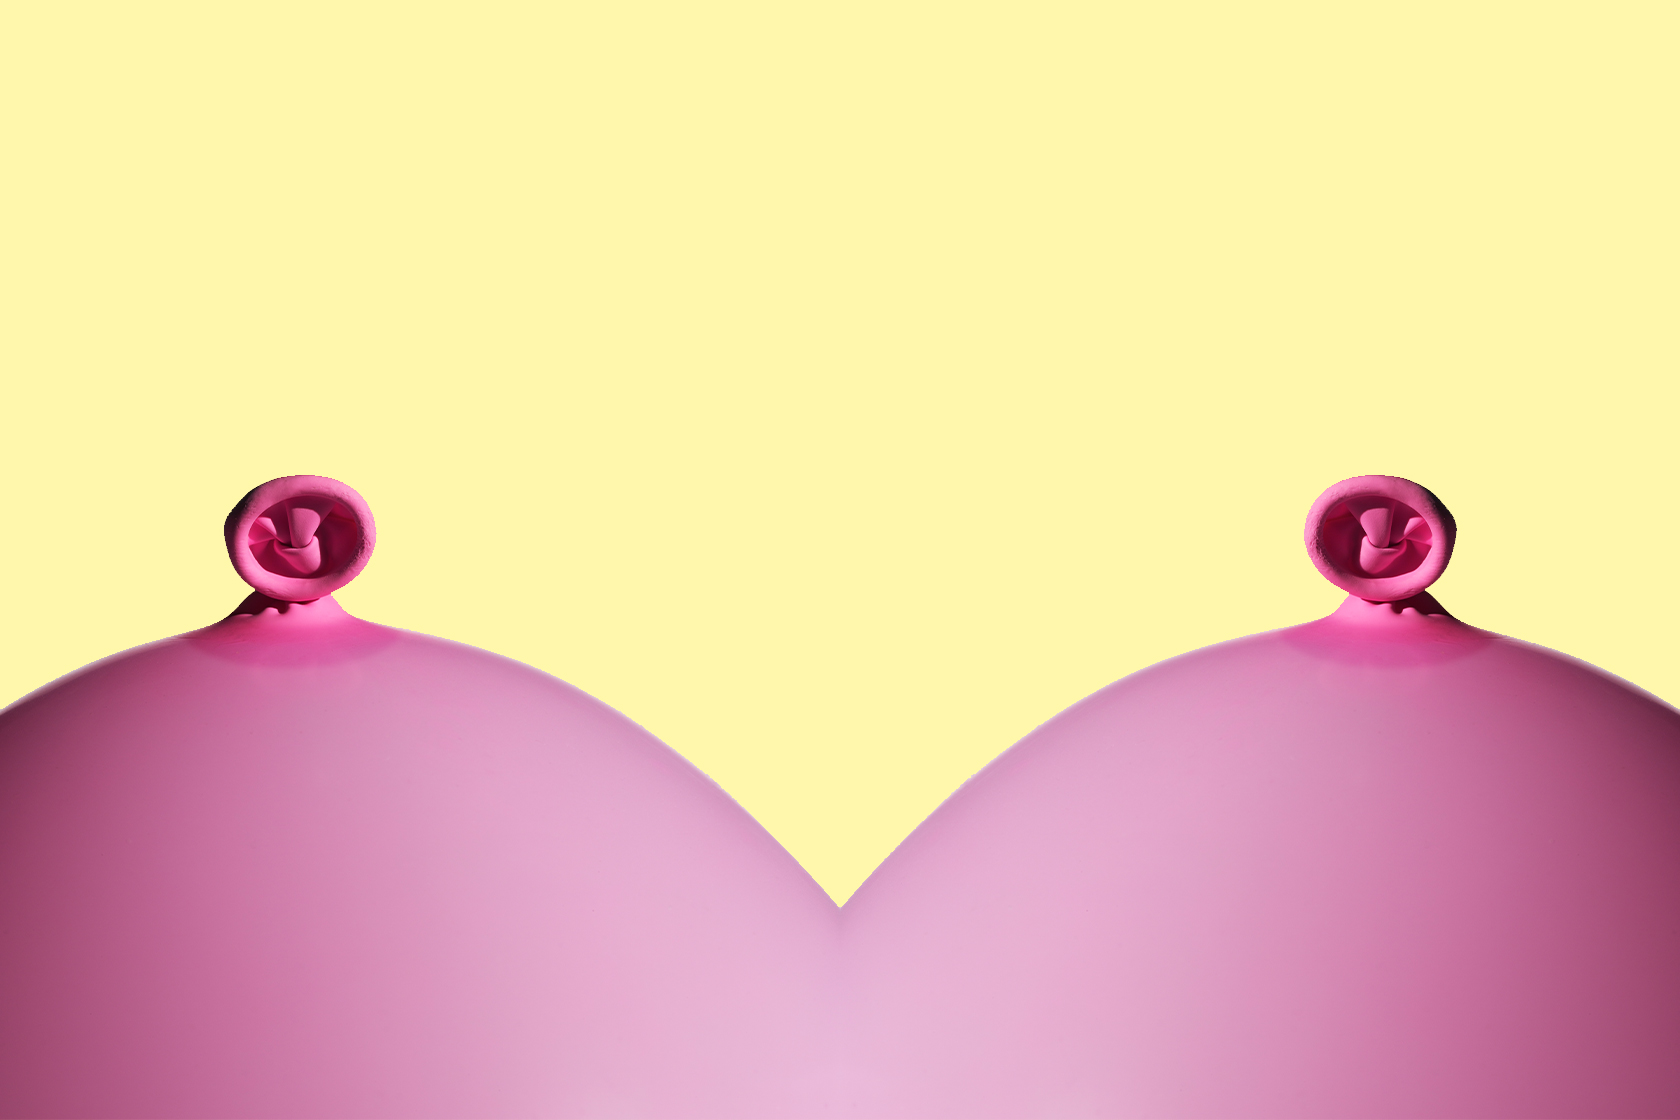 Britain's boobs are getting bigger - but which cities are home to